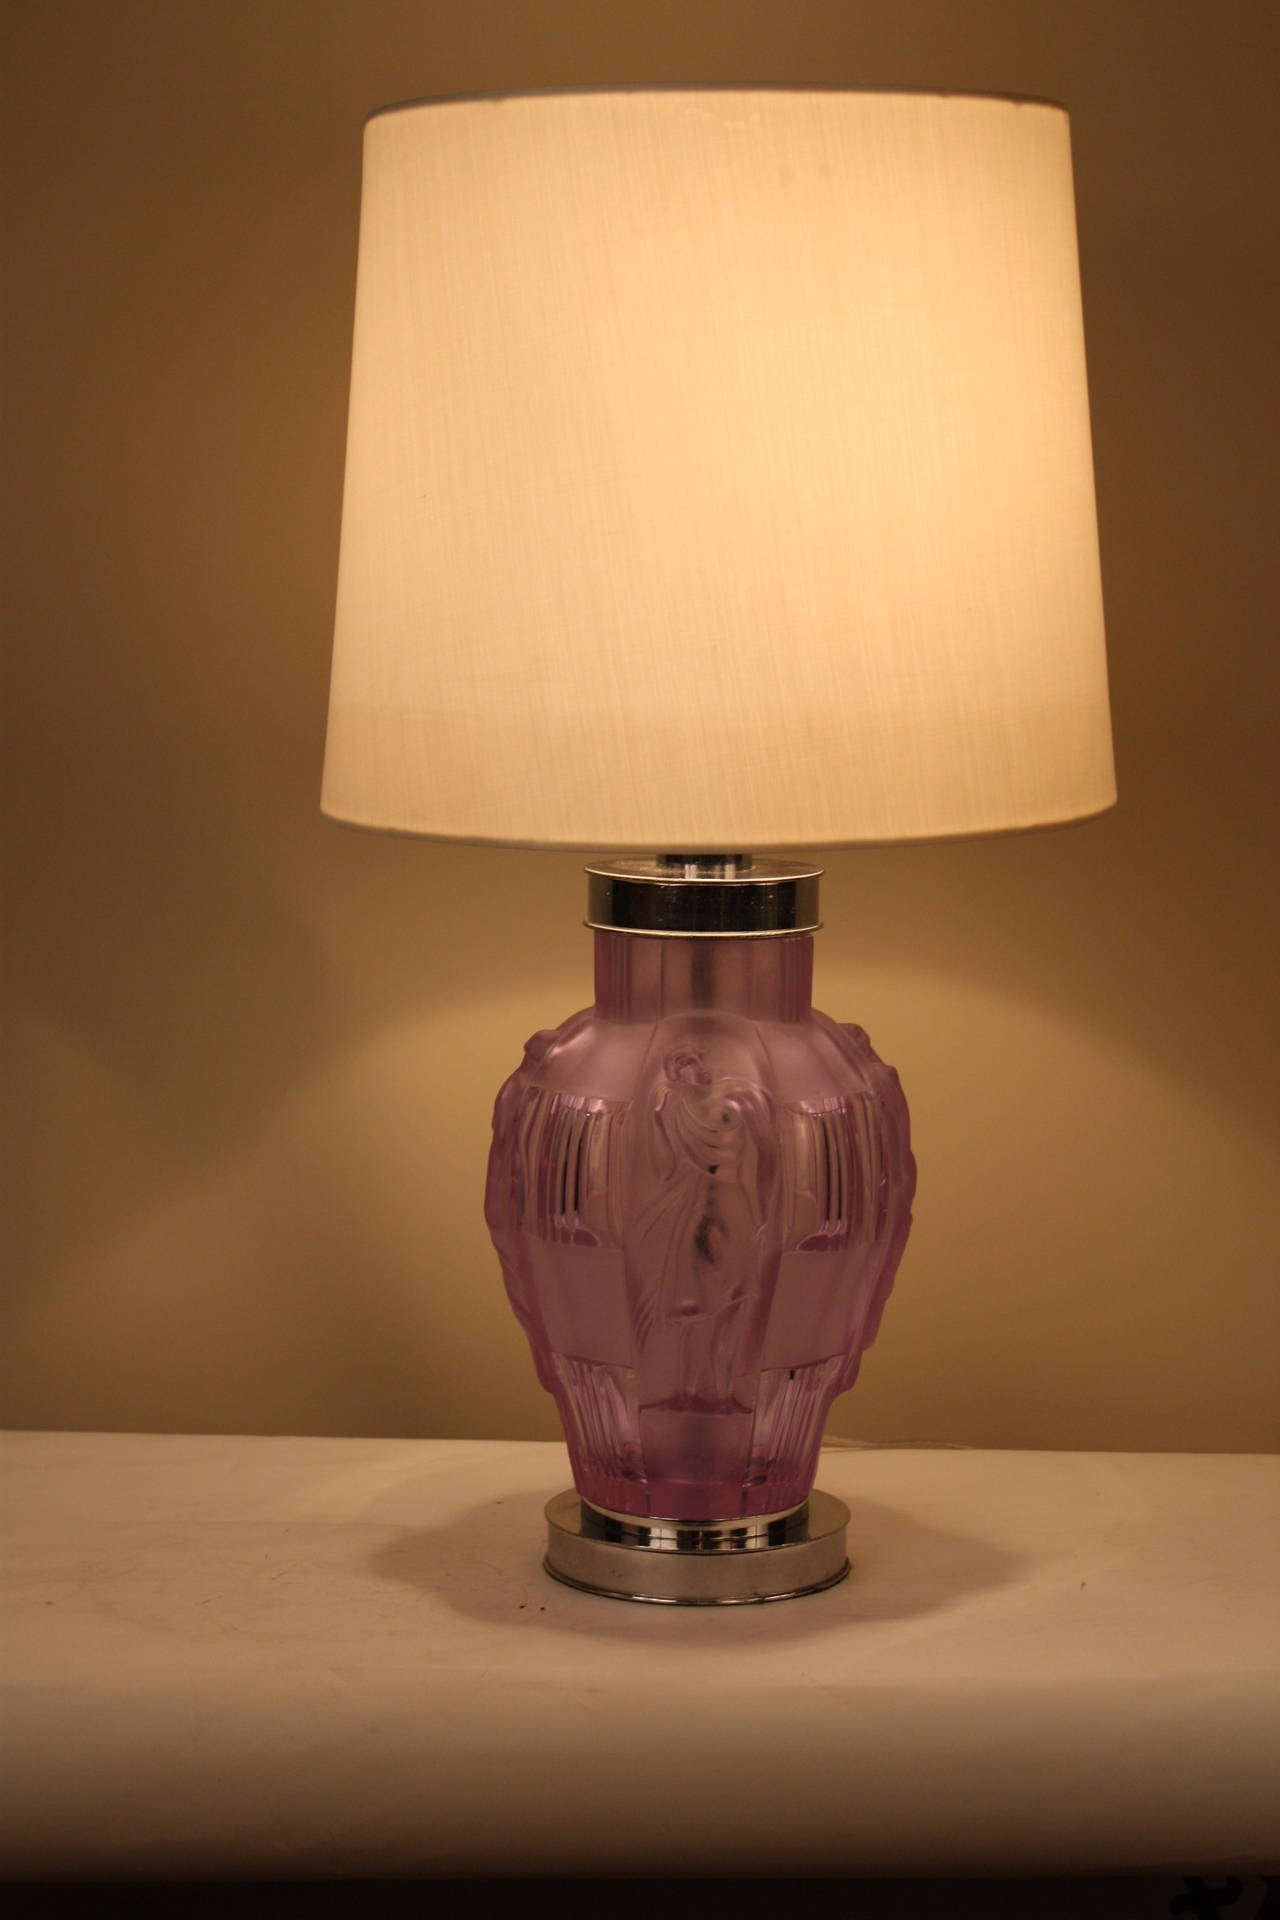 A beautiful and unique table lamp. Made of satin and acid finished light purple color glass, the surface is both frosted and highly polished with four semi-nude women, giving the fogged glass translucent highlights.